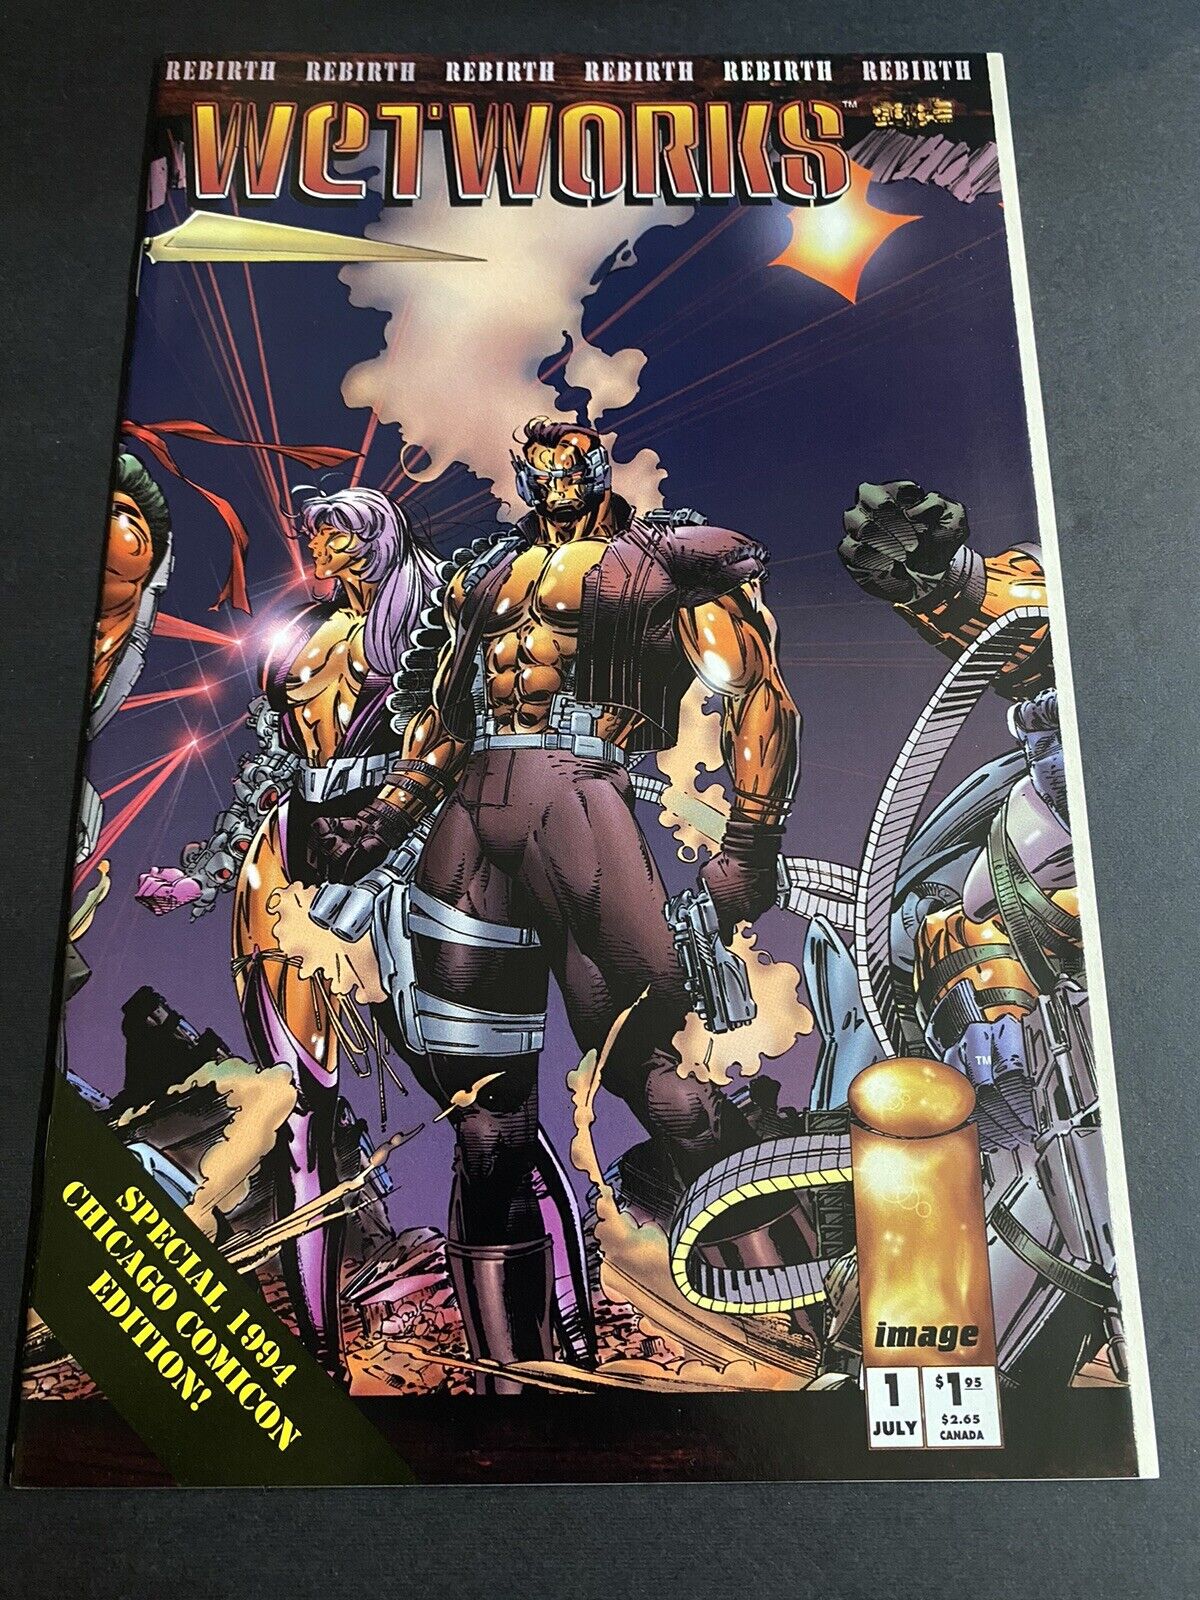 Wetworks 1, Rare 1994 Chicago Comicon Edition. Beautiful NM/NM+ Image